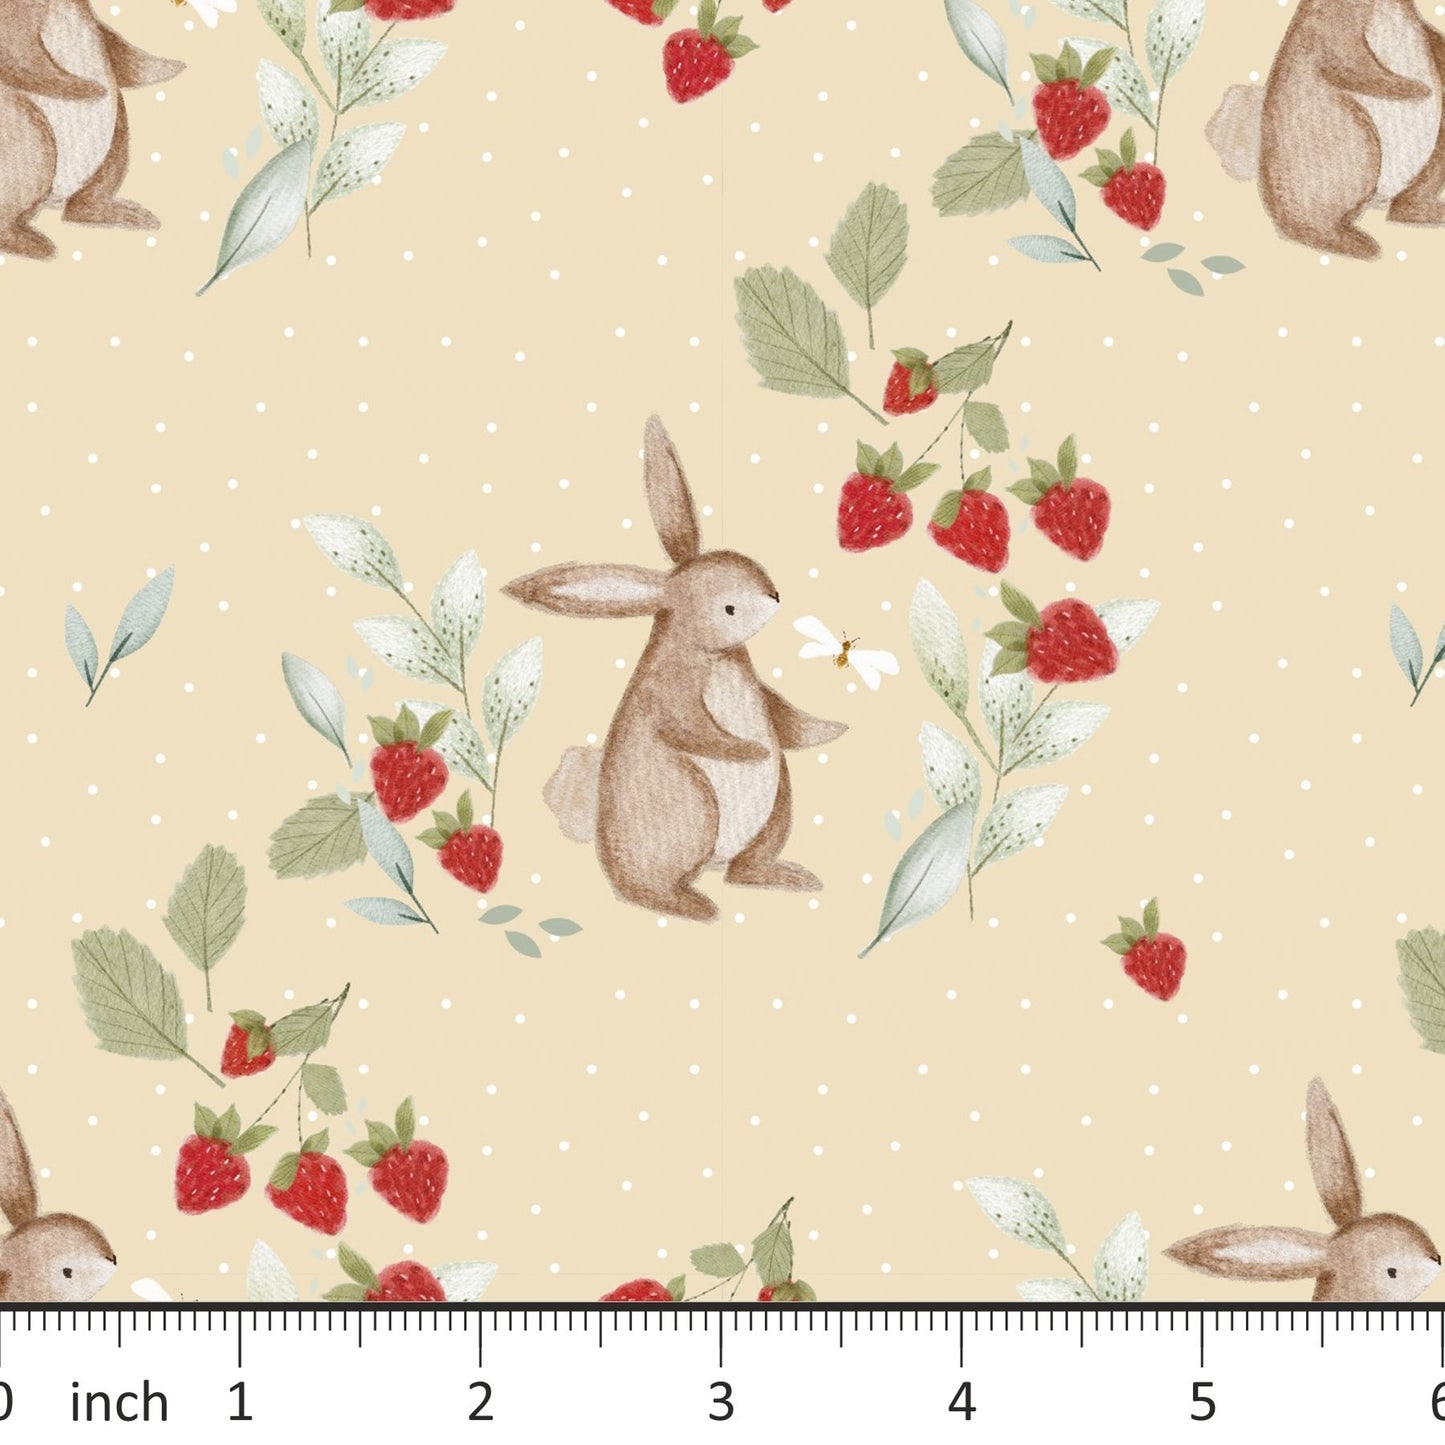 Lumelo and Ginger - Bera on Vanilla - Rabbit - Bunny - Strawberry Garden - Little Rhody Sewing Co.